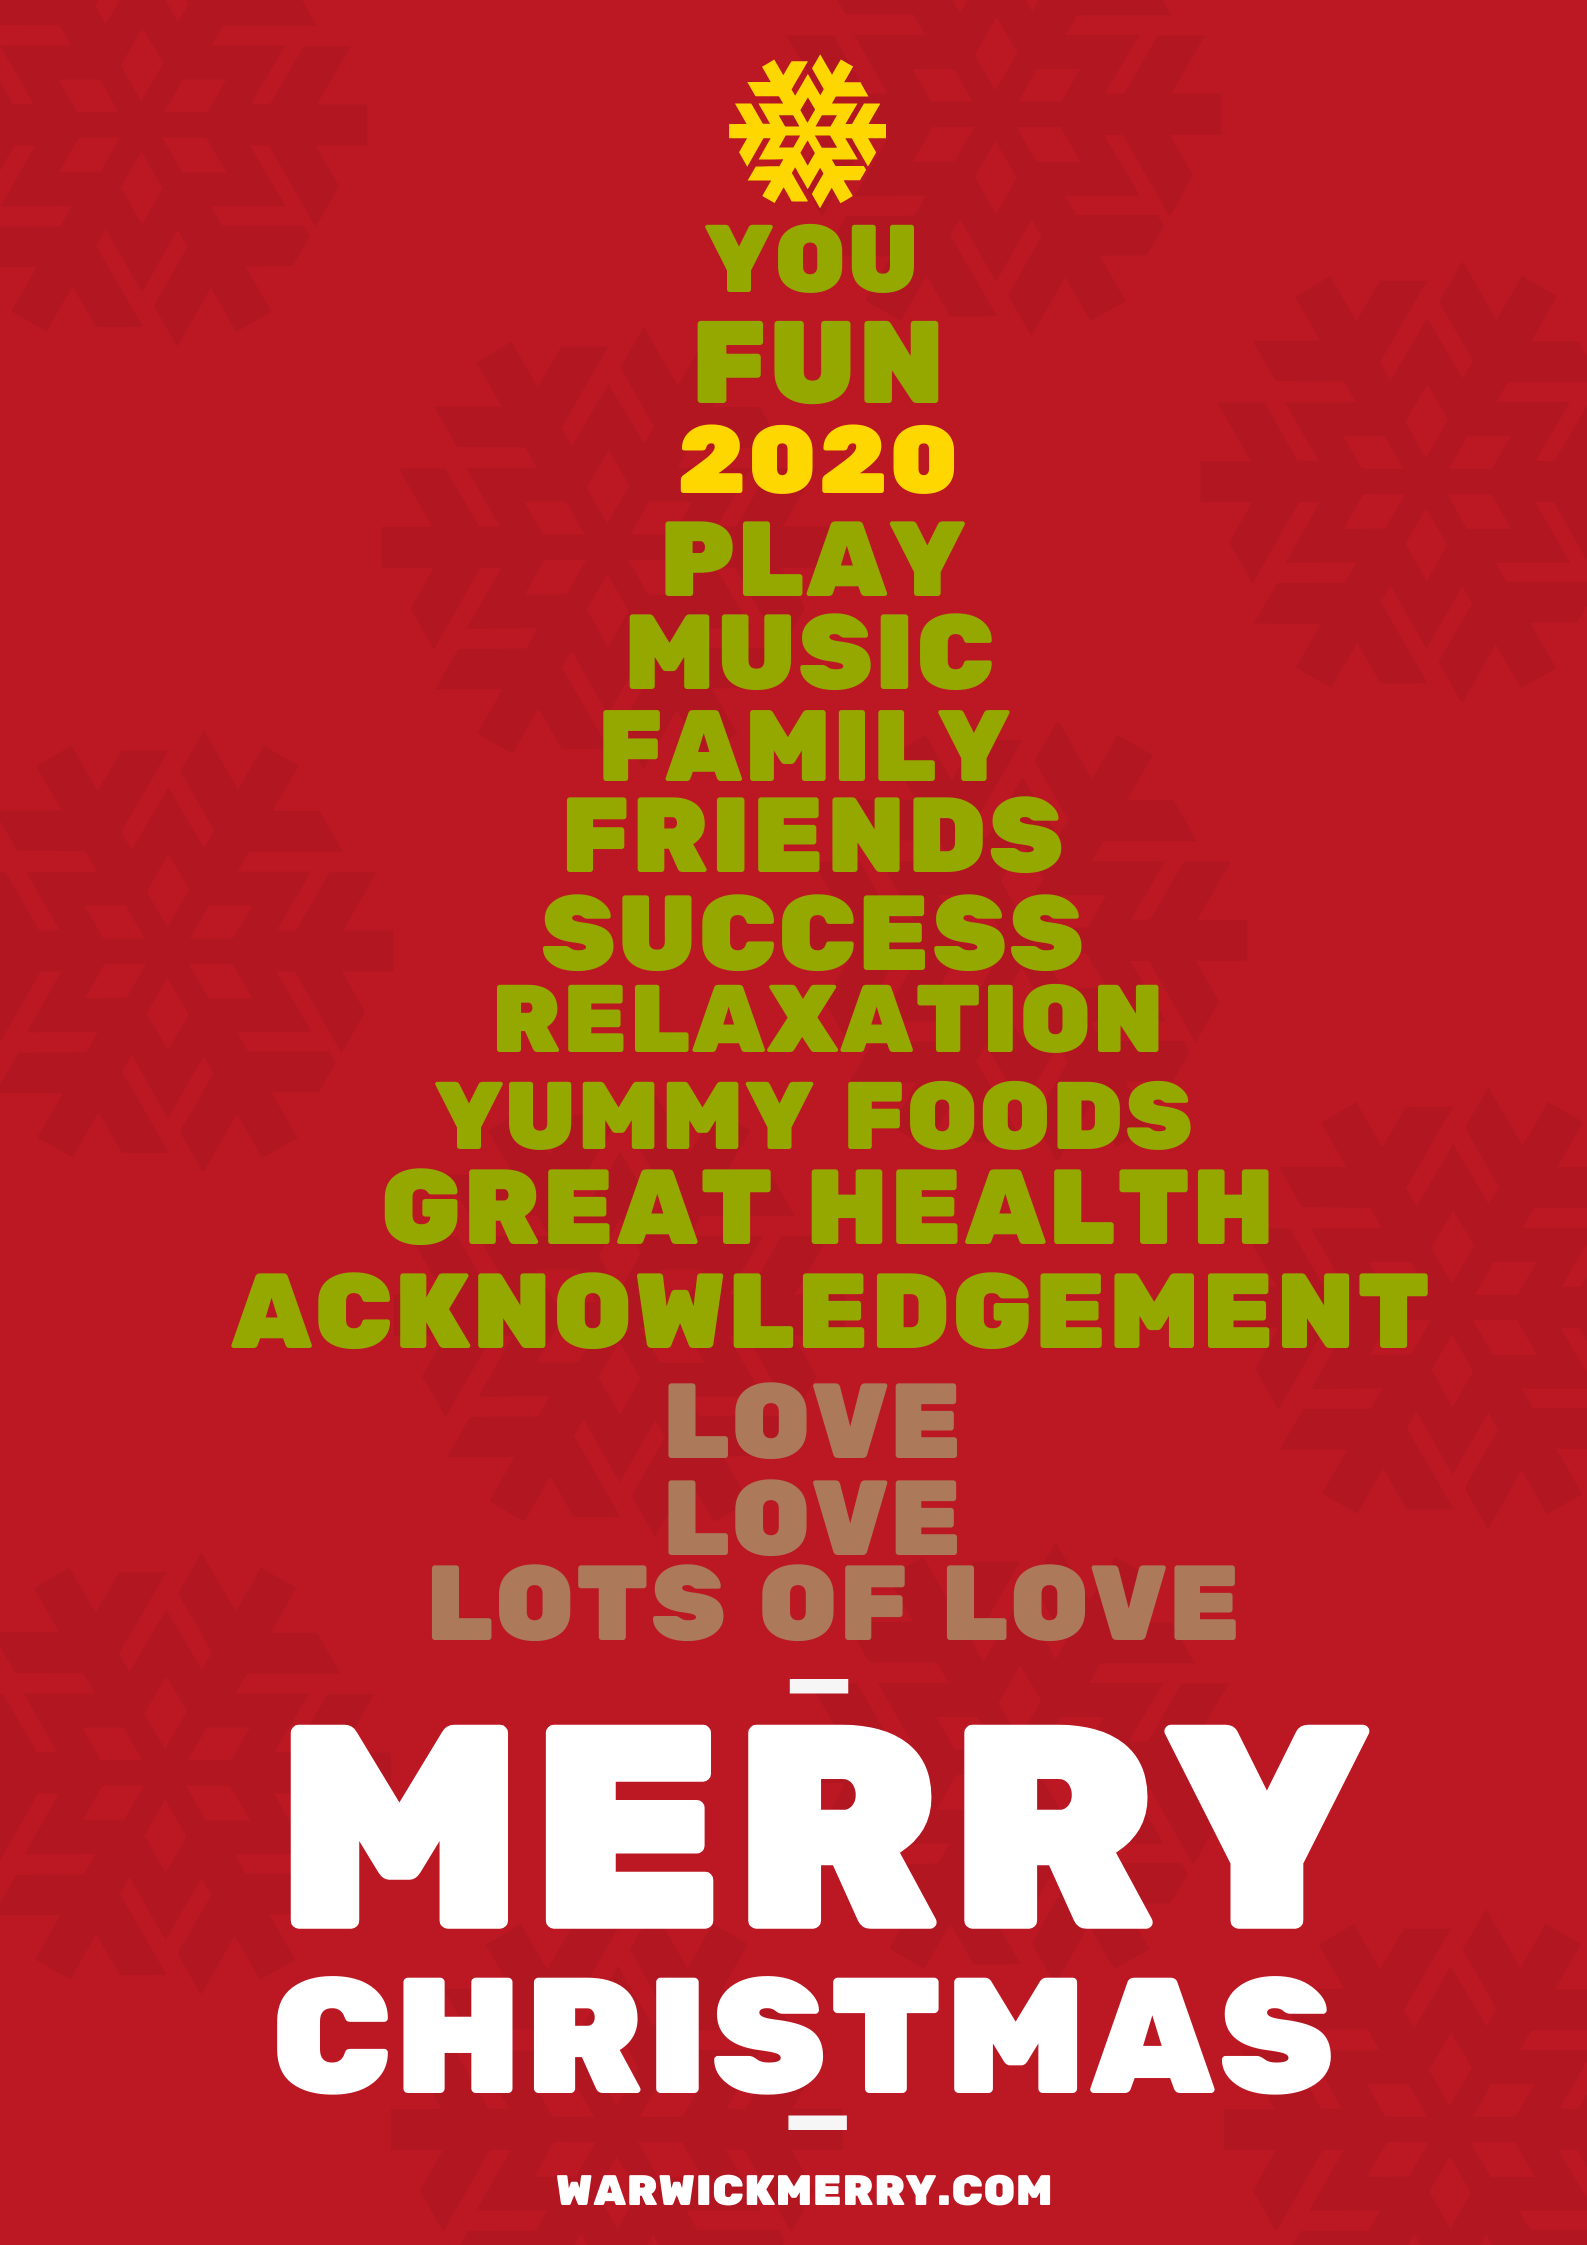 A christmas tree made up of the words: You, fun, 2020, play, music, family, friends, success, relacation,yummy foods, great health, acknowledgement, love, love, lots of love.